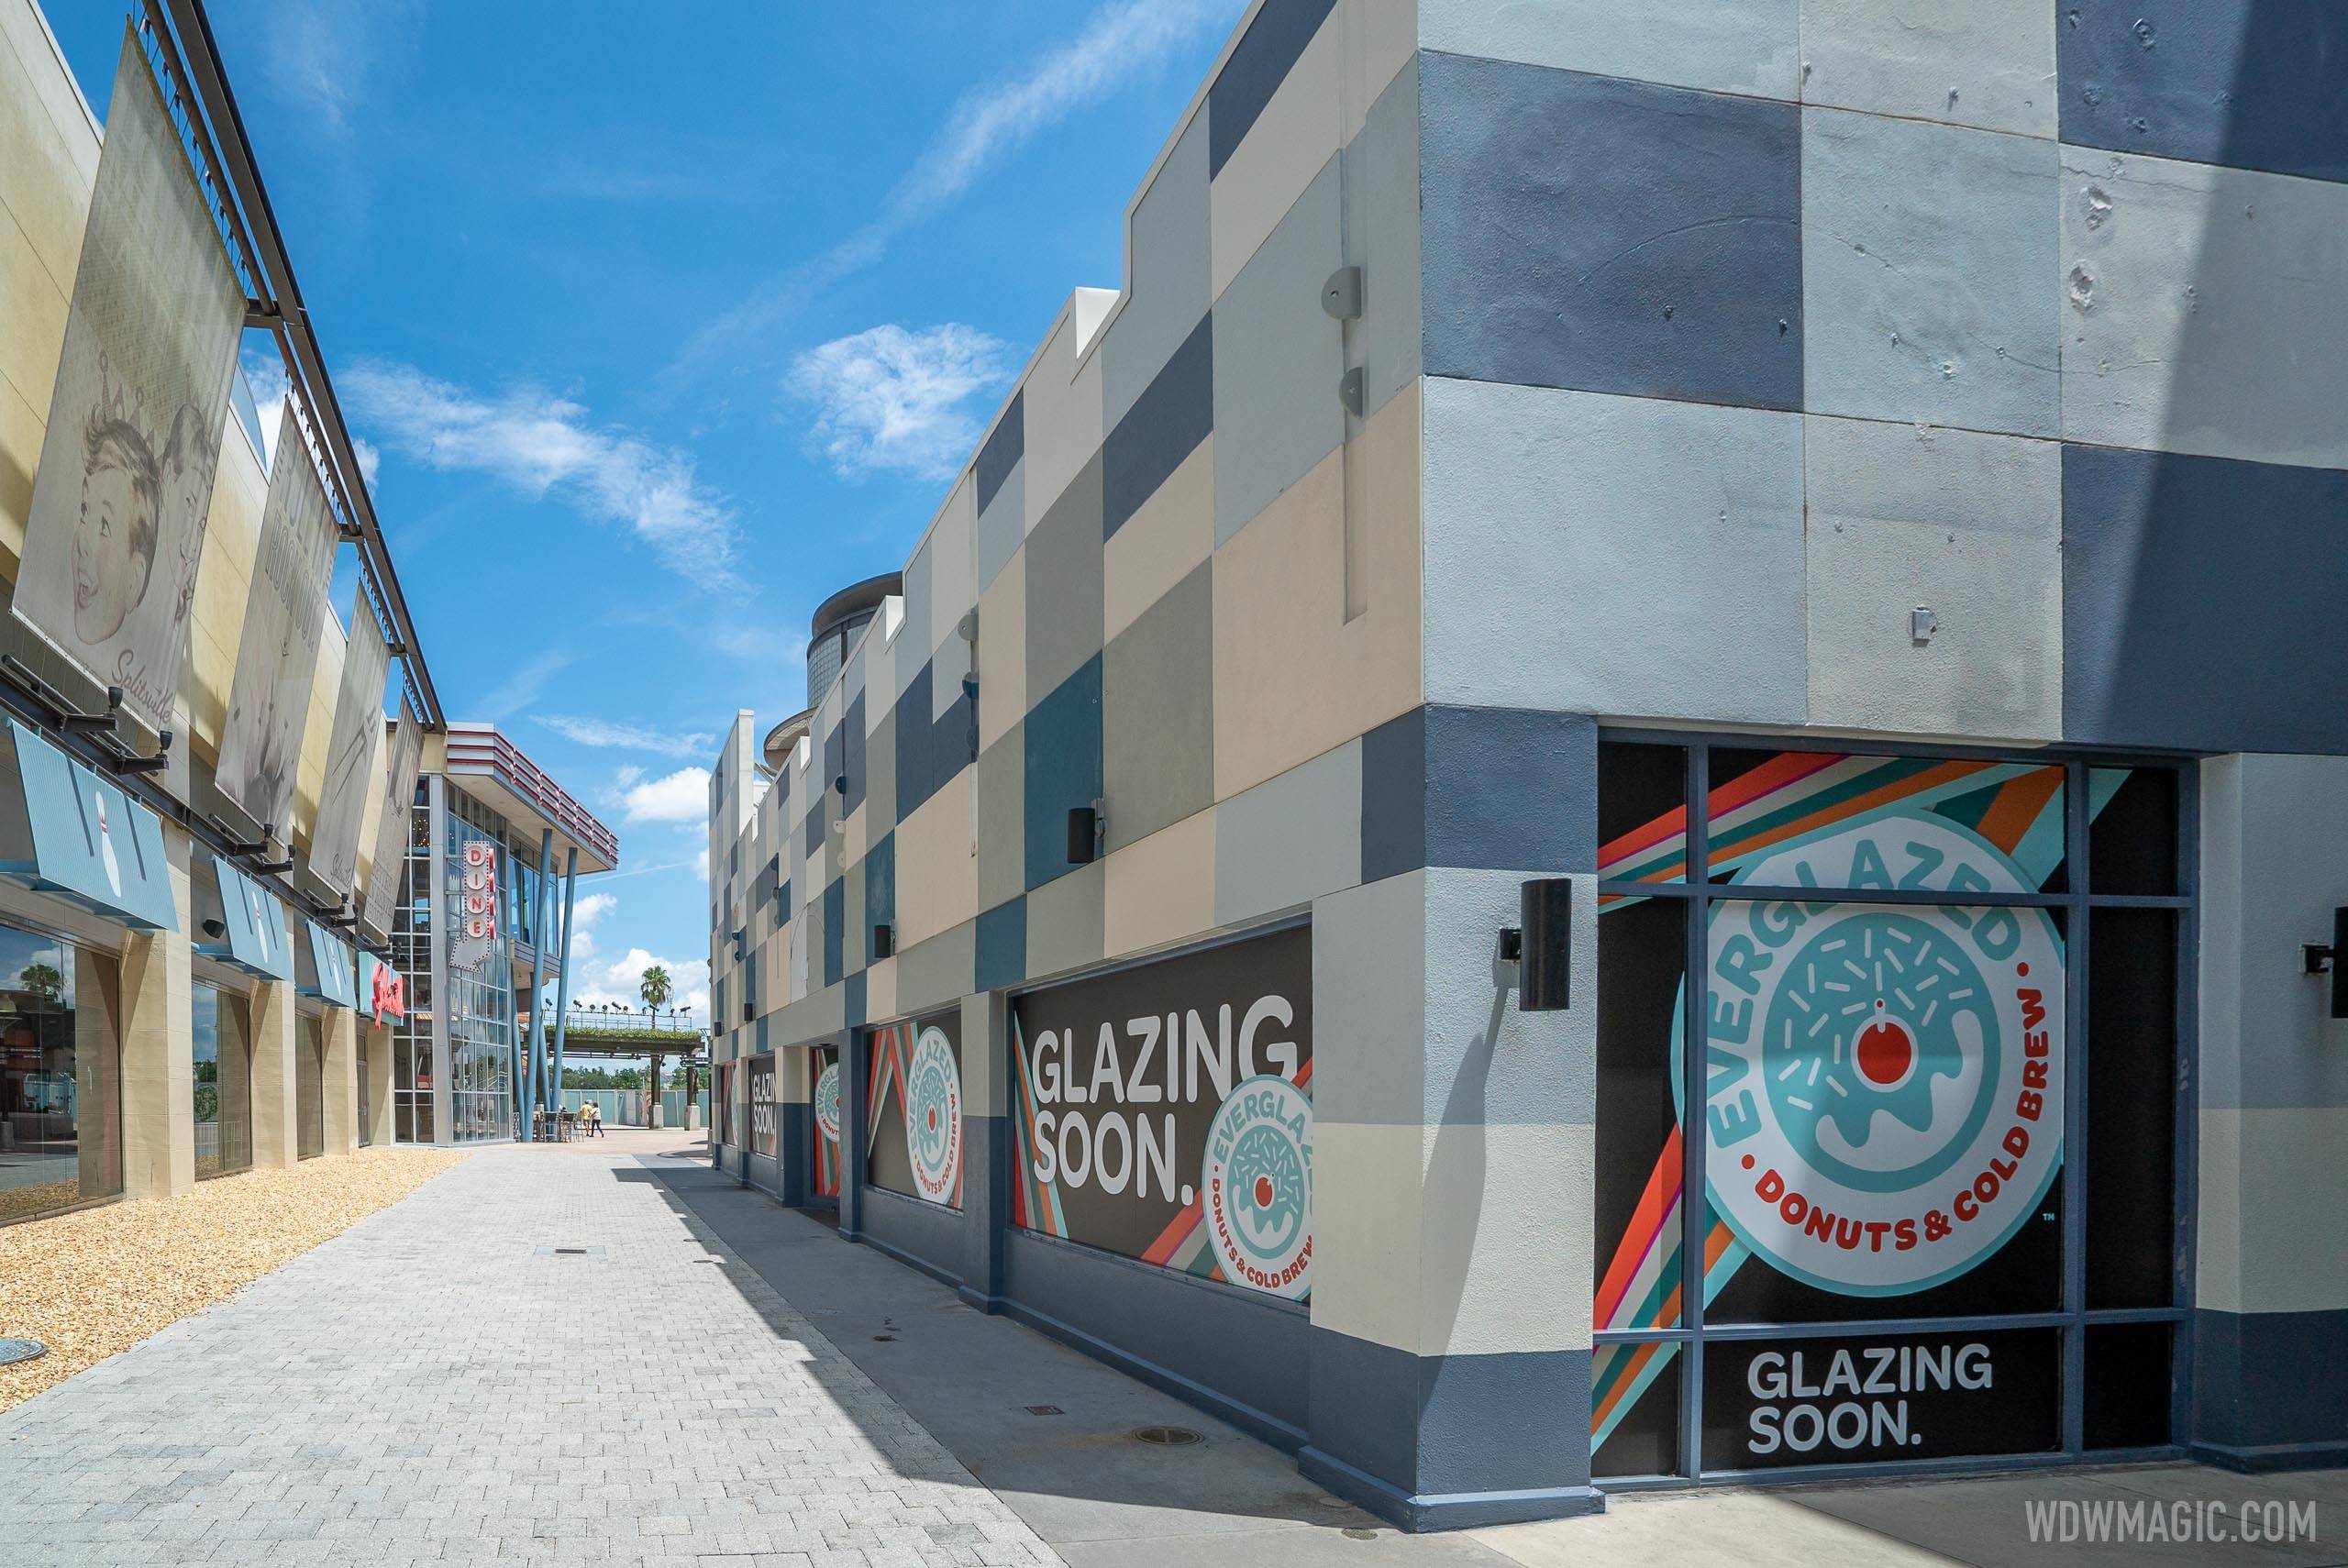 PHOTOS - Everglazed Donuts and Cold Brew construction at Disney Springs